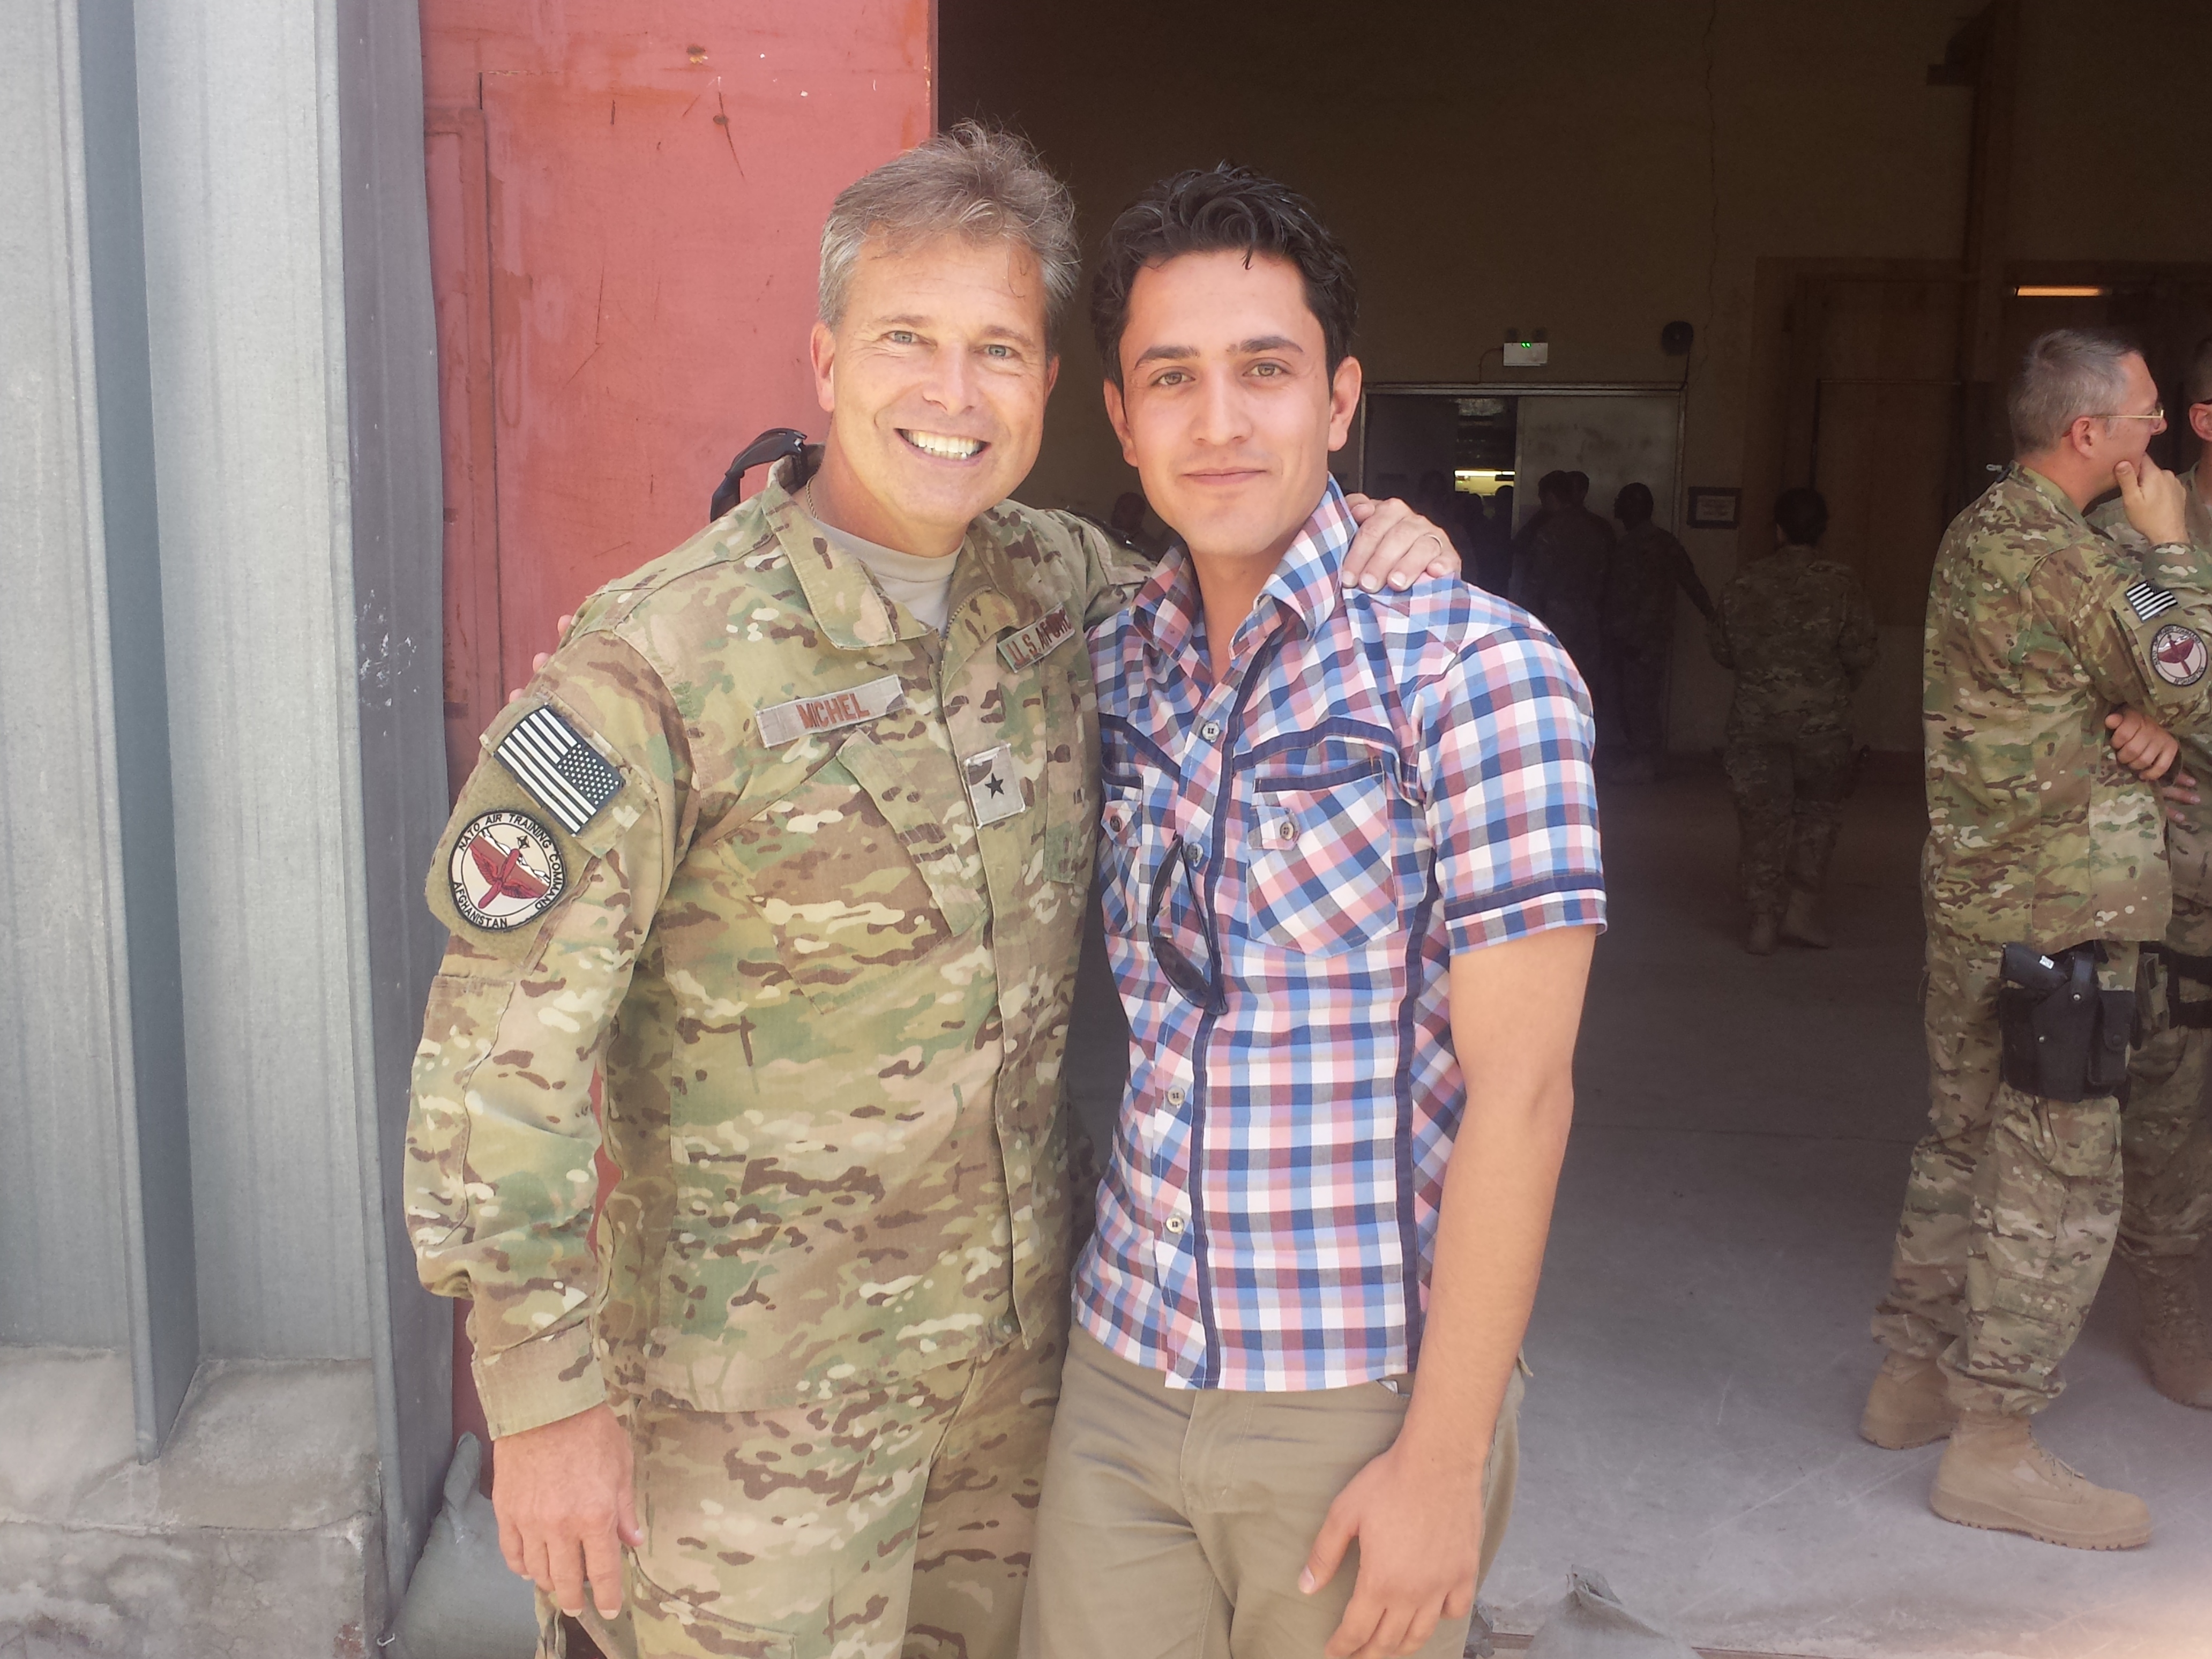 Memorial photo with my US One Star general in Afghanistan.